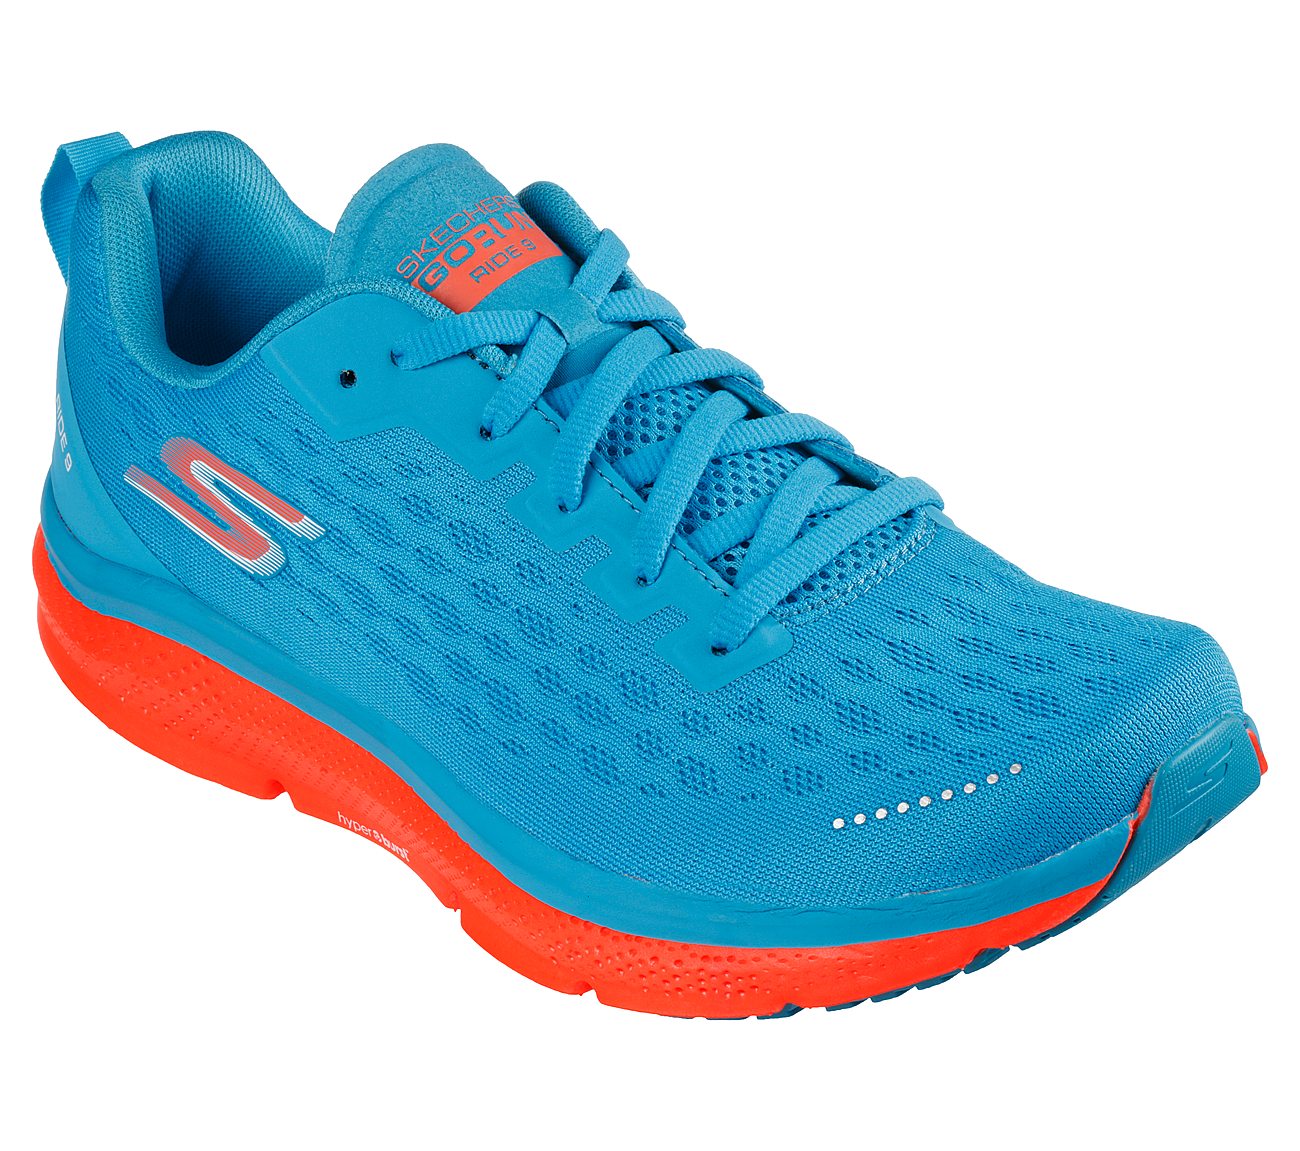 GO RUN RIDE 9 - RIDE 9, BLUE/CORAL Footwear Lateral View